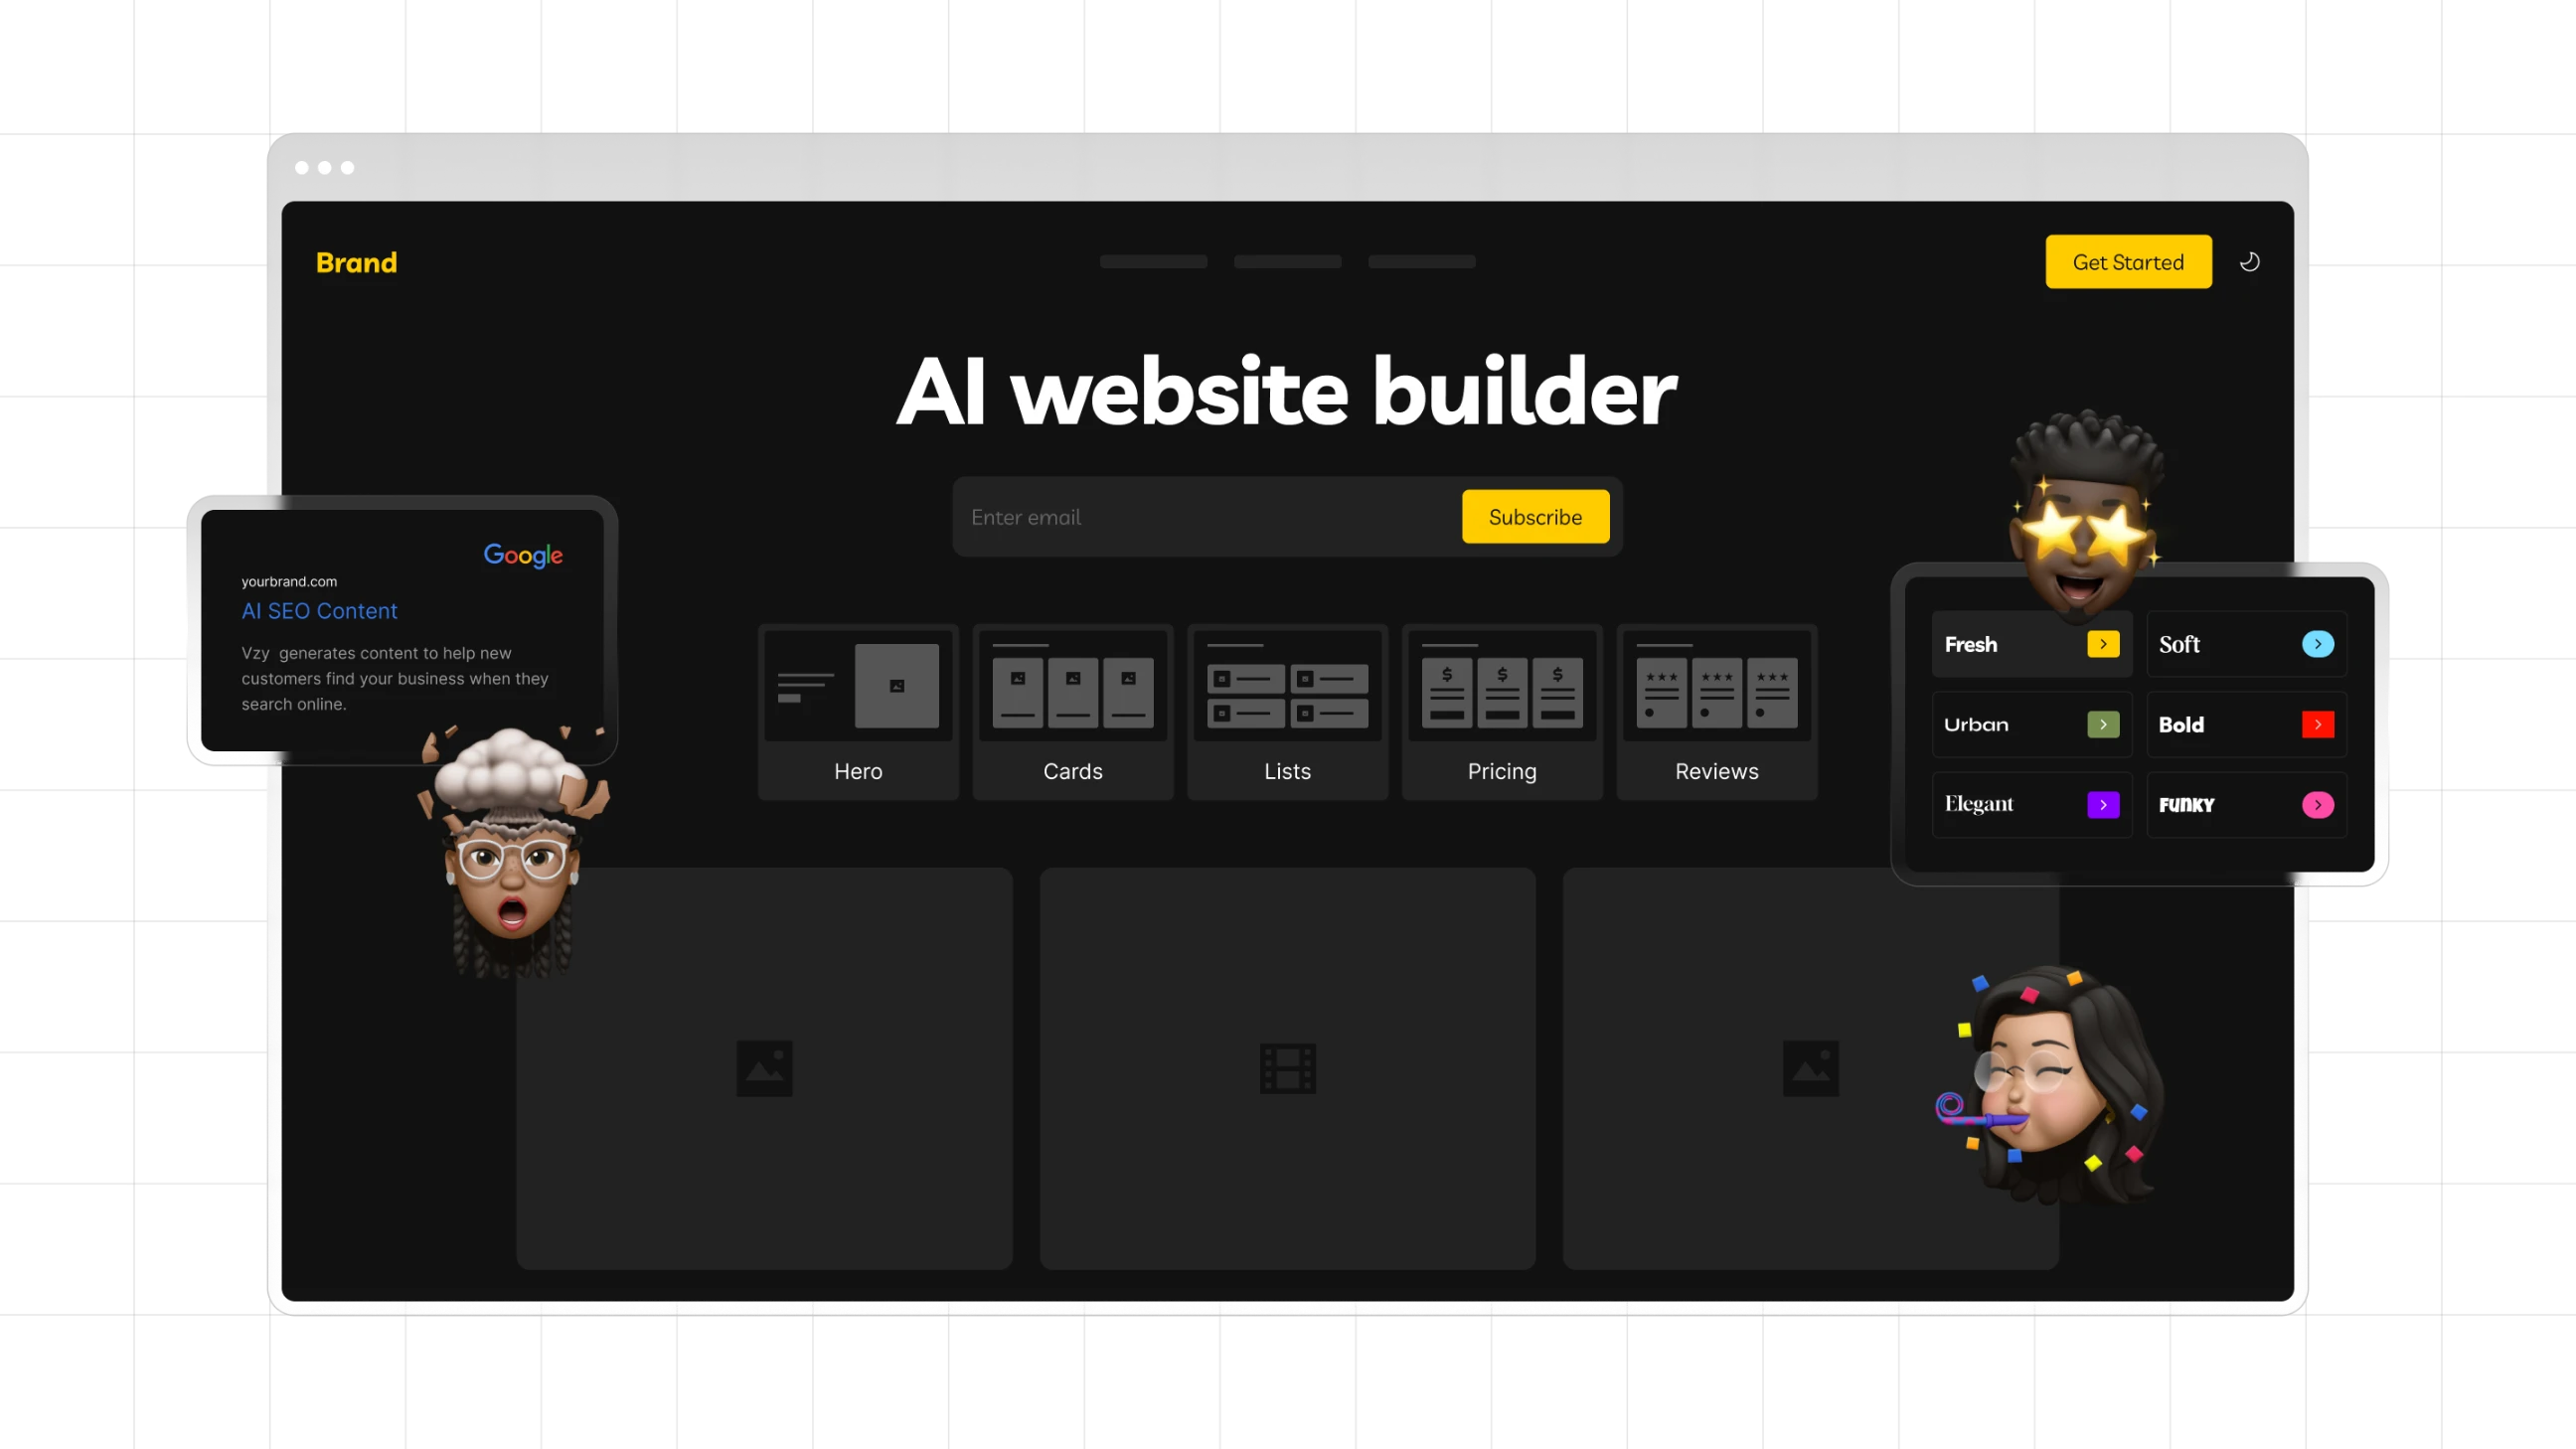 Vzy AI website builder showing features like instant customization, AI SEO content and different responsive sections.